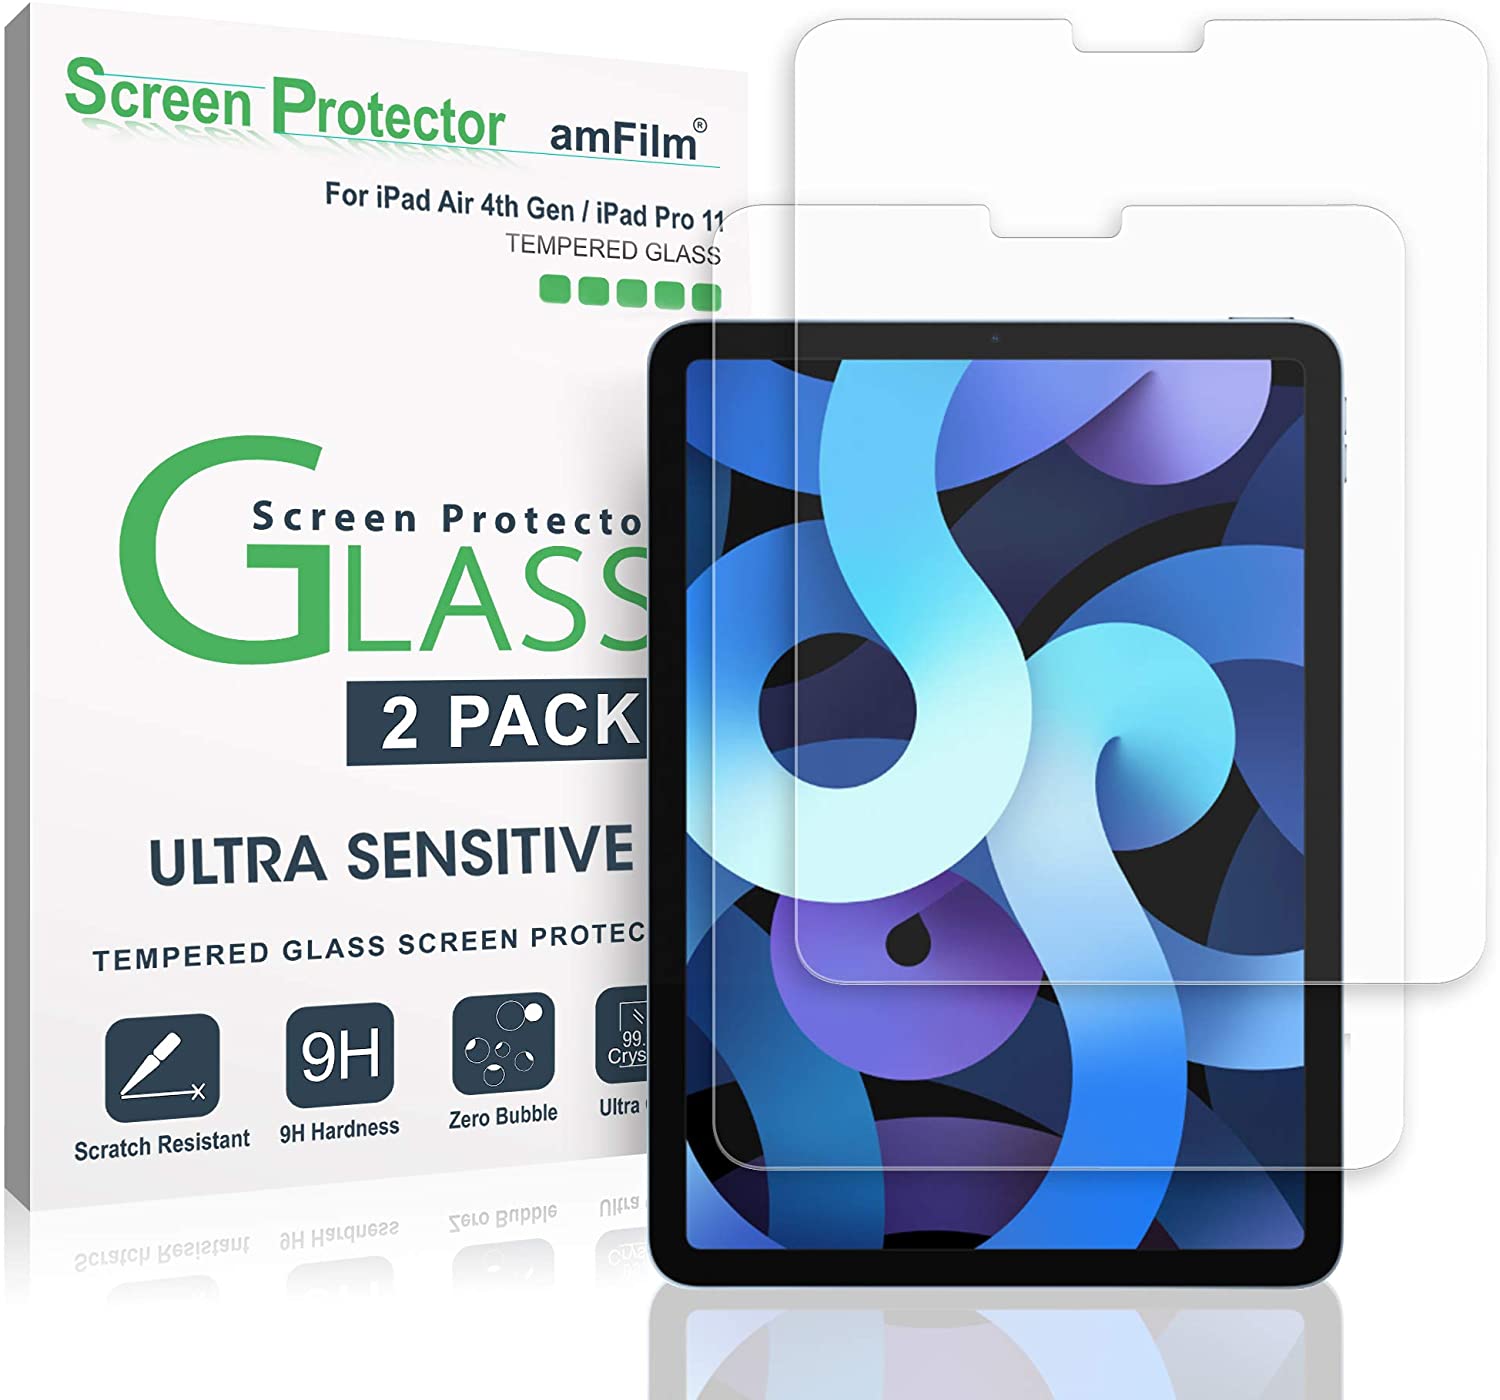 (2 Pack) Screen Protector for iPad Air 4 (2020) and iPad Pro 11 Inch (2020/2018 Models). - e4cents